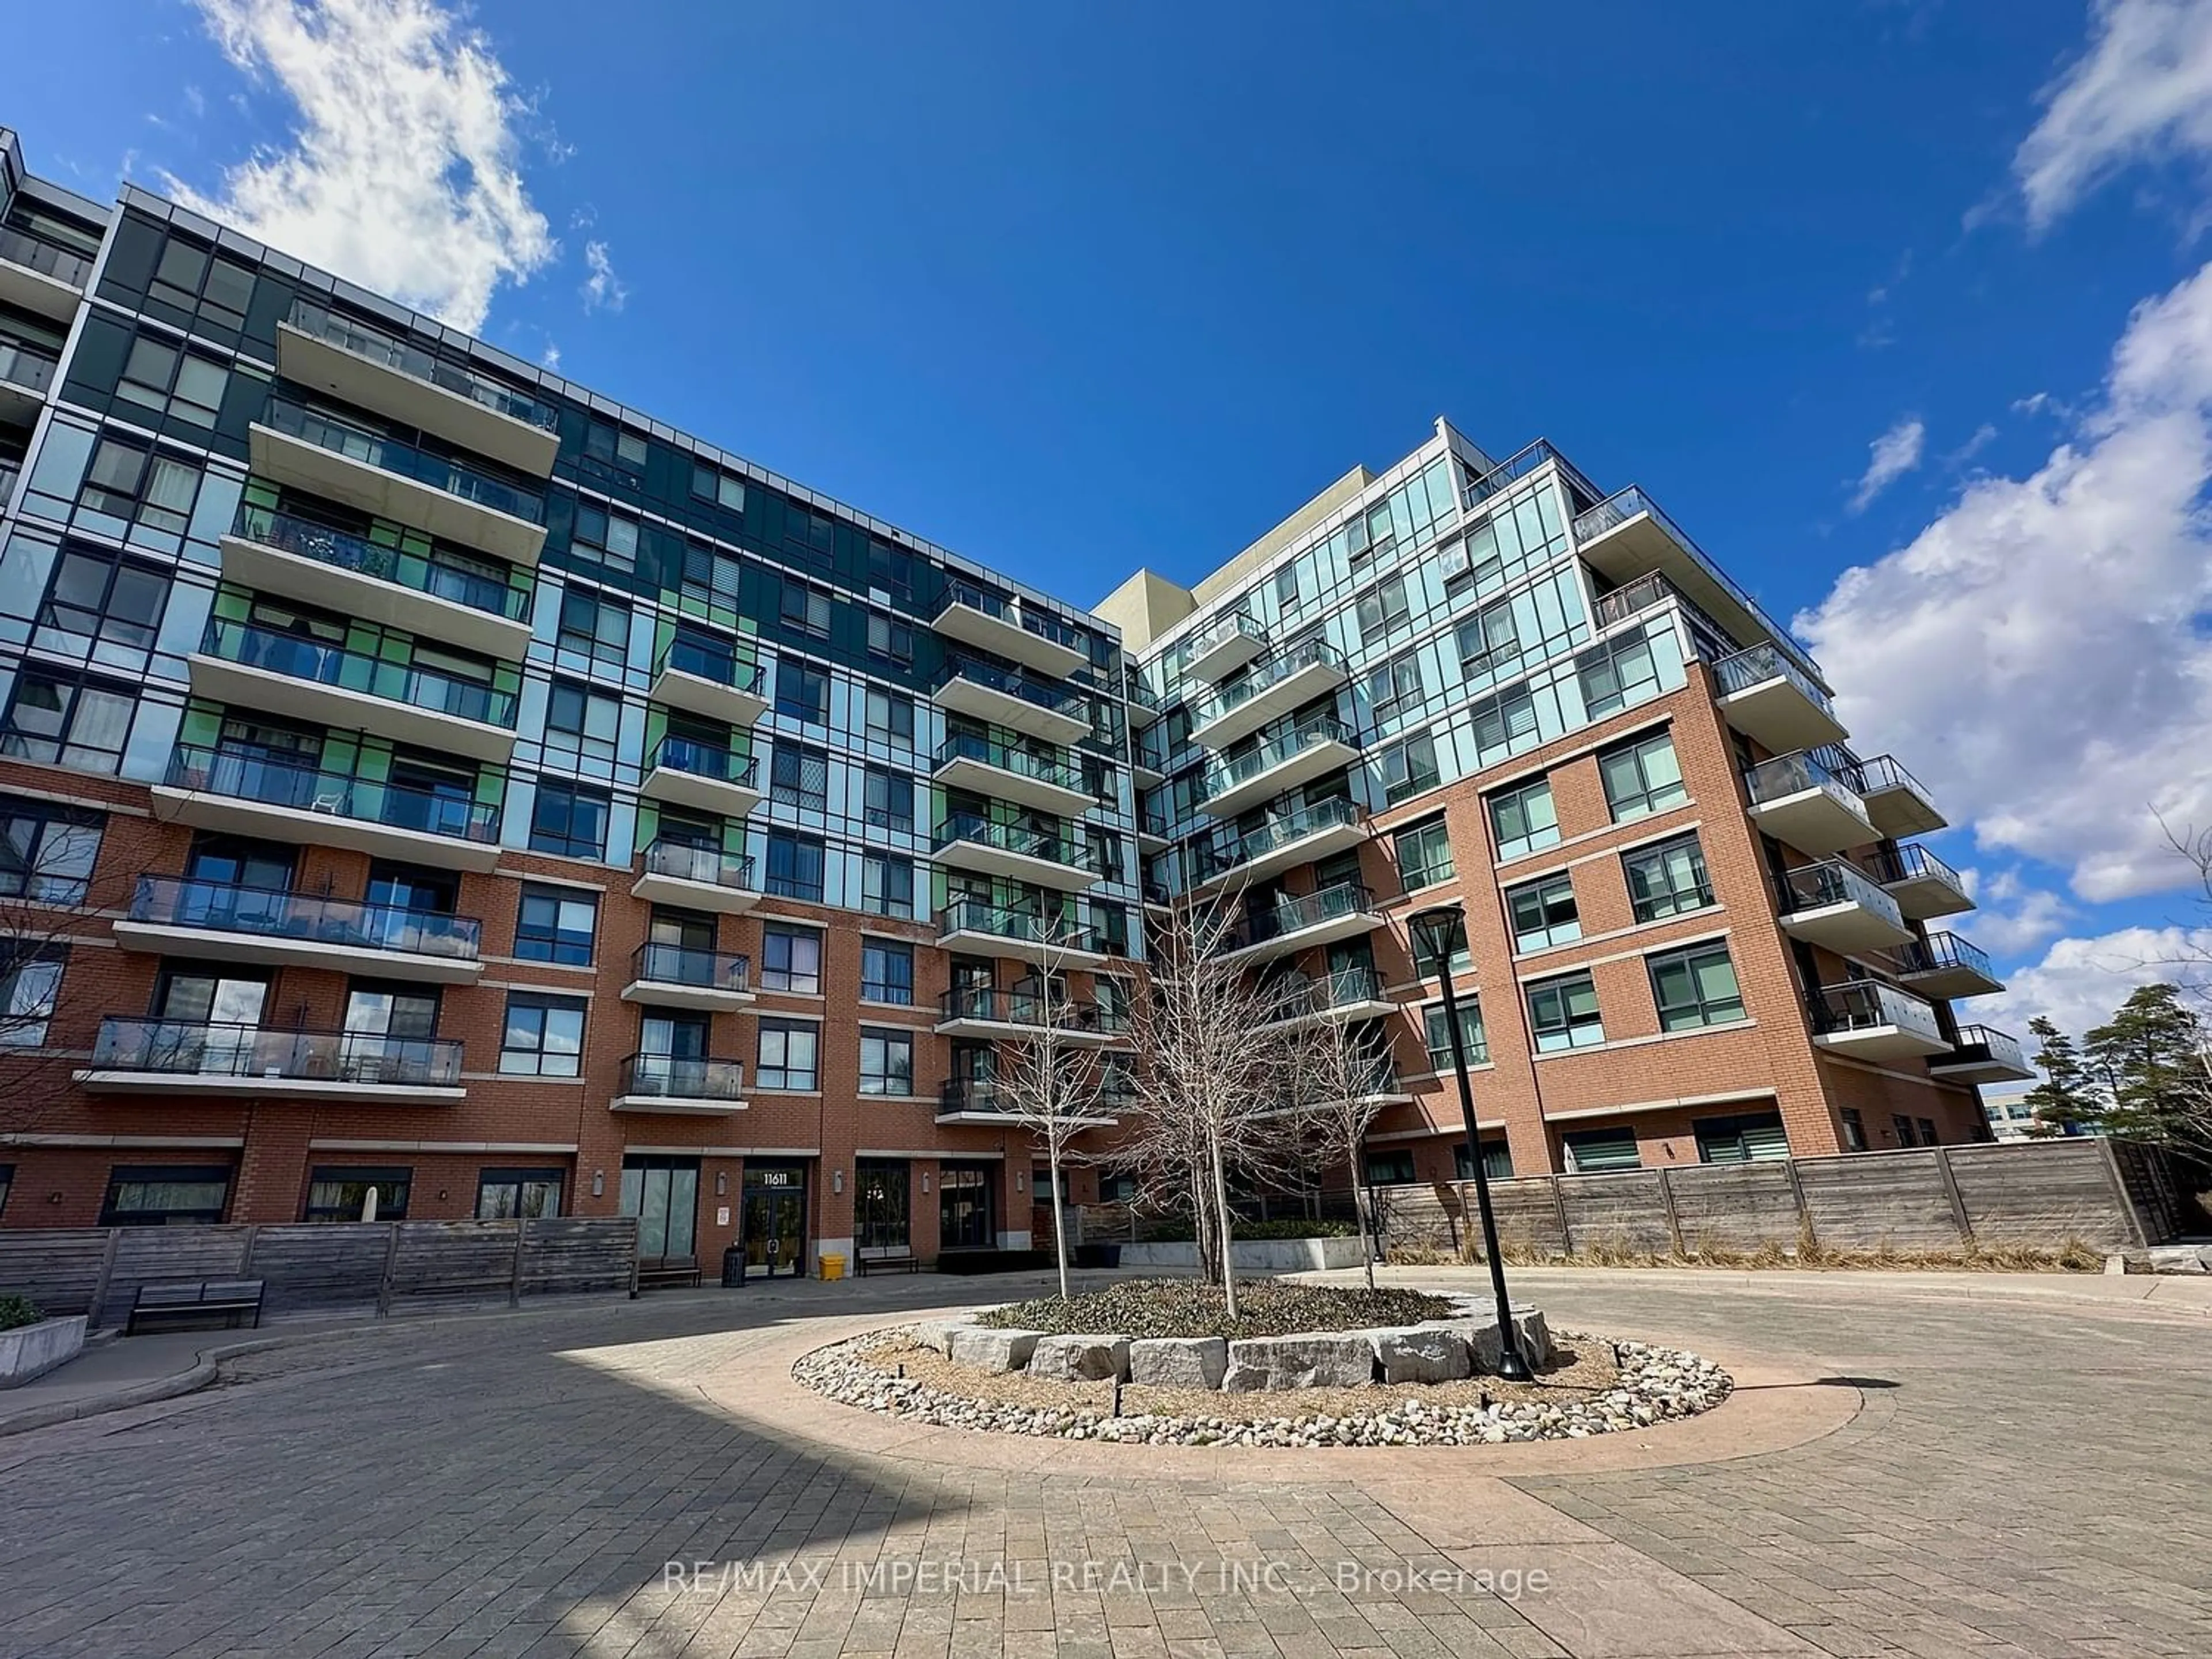 A pic from exterior of the house or condo for 11611 Yonge St #523, Richmond Hill Ontario L4E 3N8